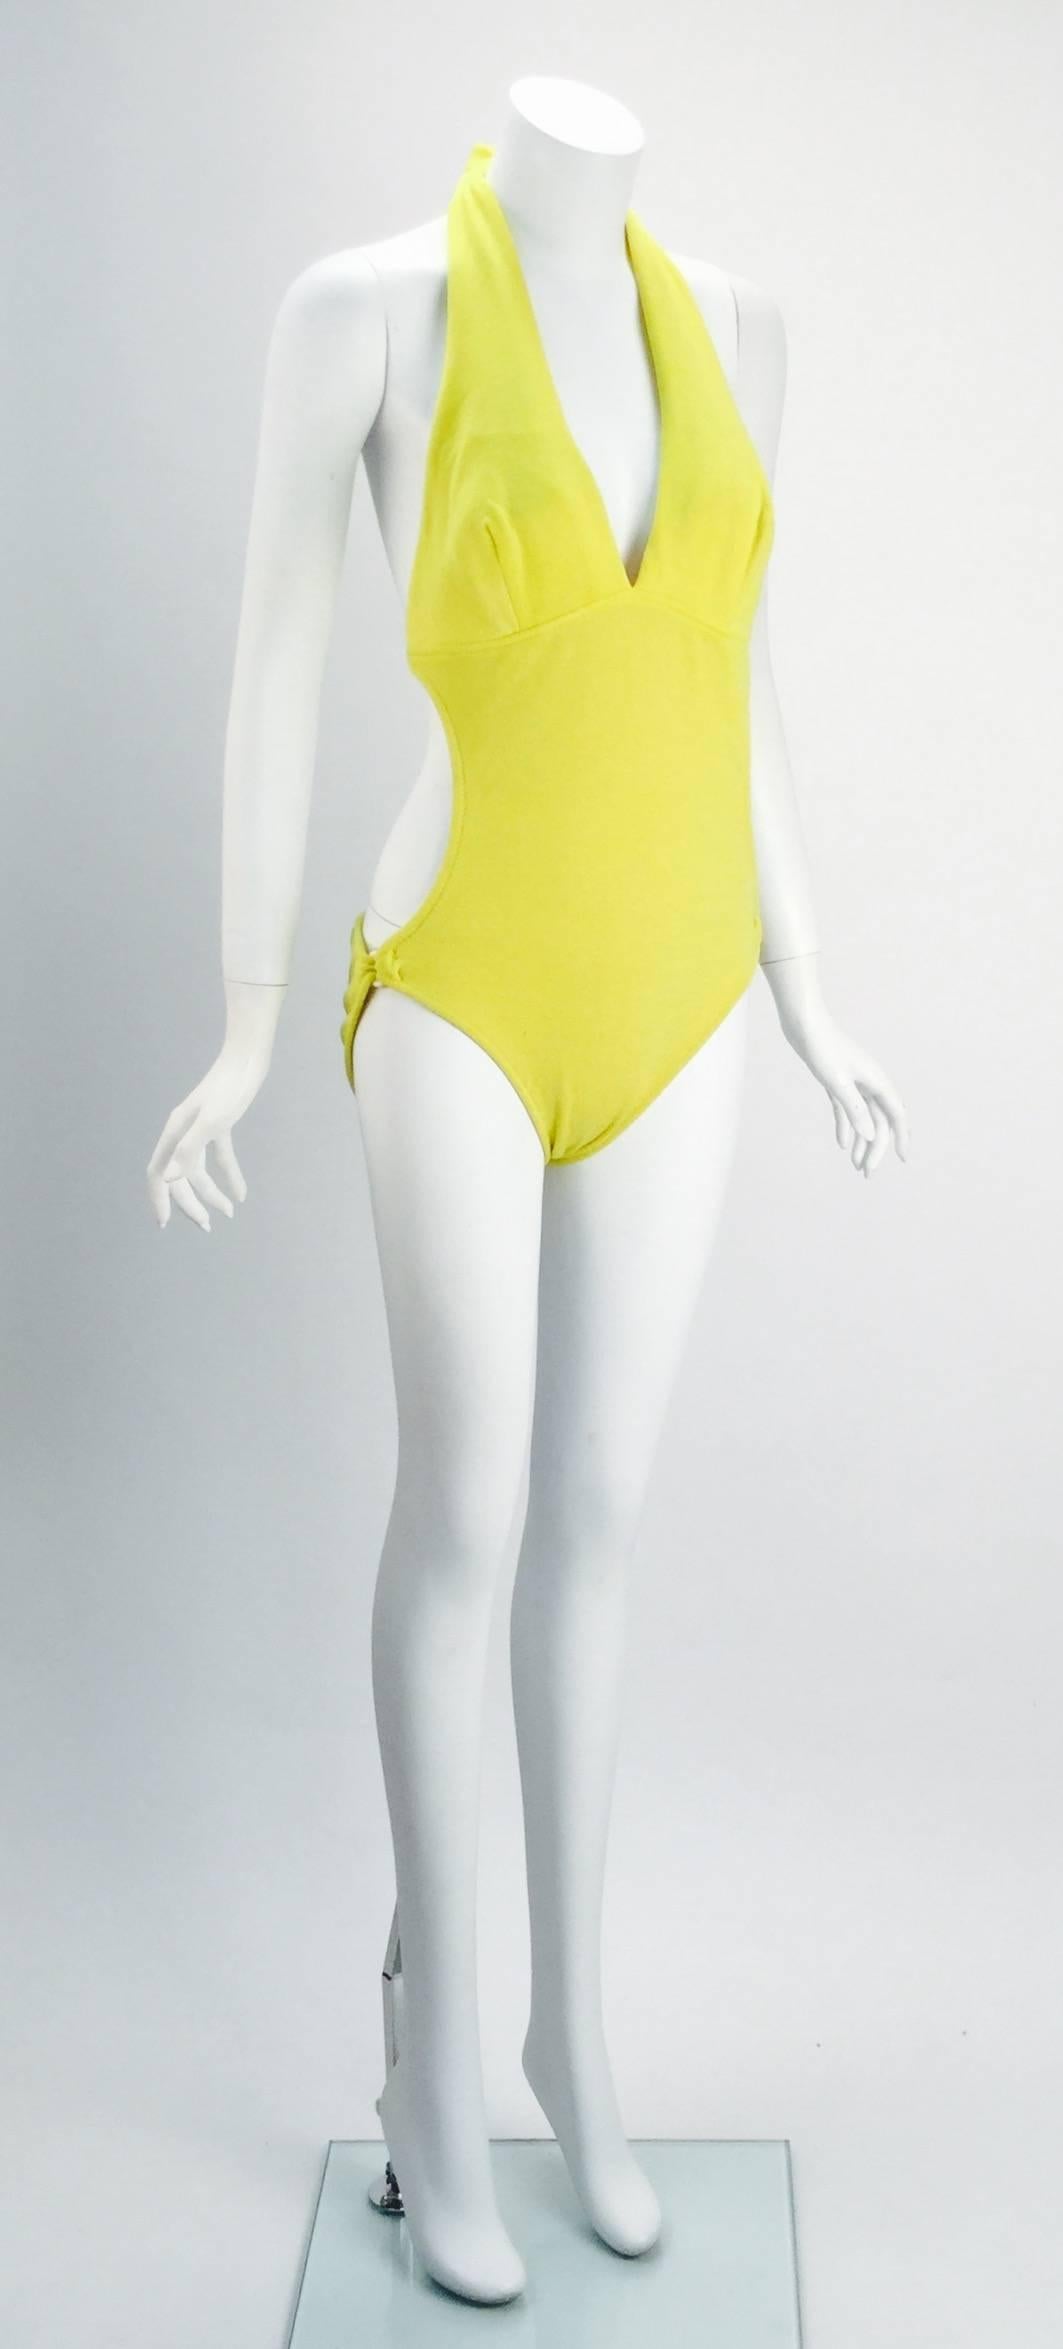 
1960's Brigance for Sinclair yellow monokini. Suit has a halter top that ties around the neck as well as a back strap for support. Back strap hooks onto the right side. Two cut outs on side of swim suit. Two rings on each hip 

Modern size 4/6.